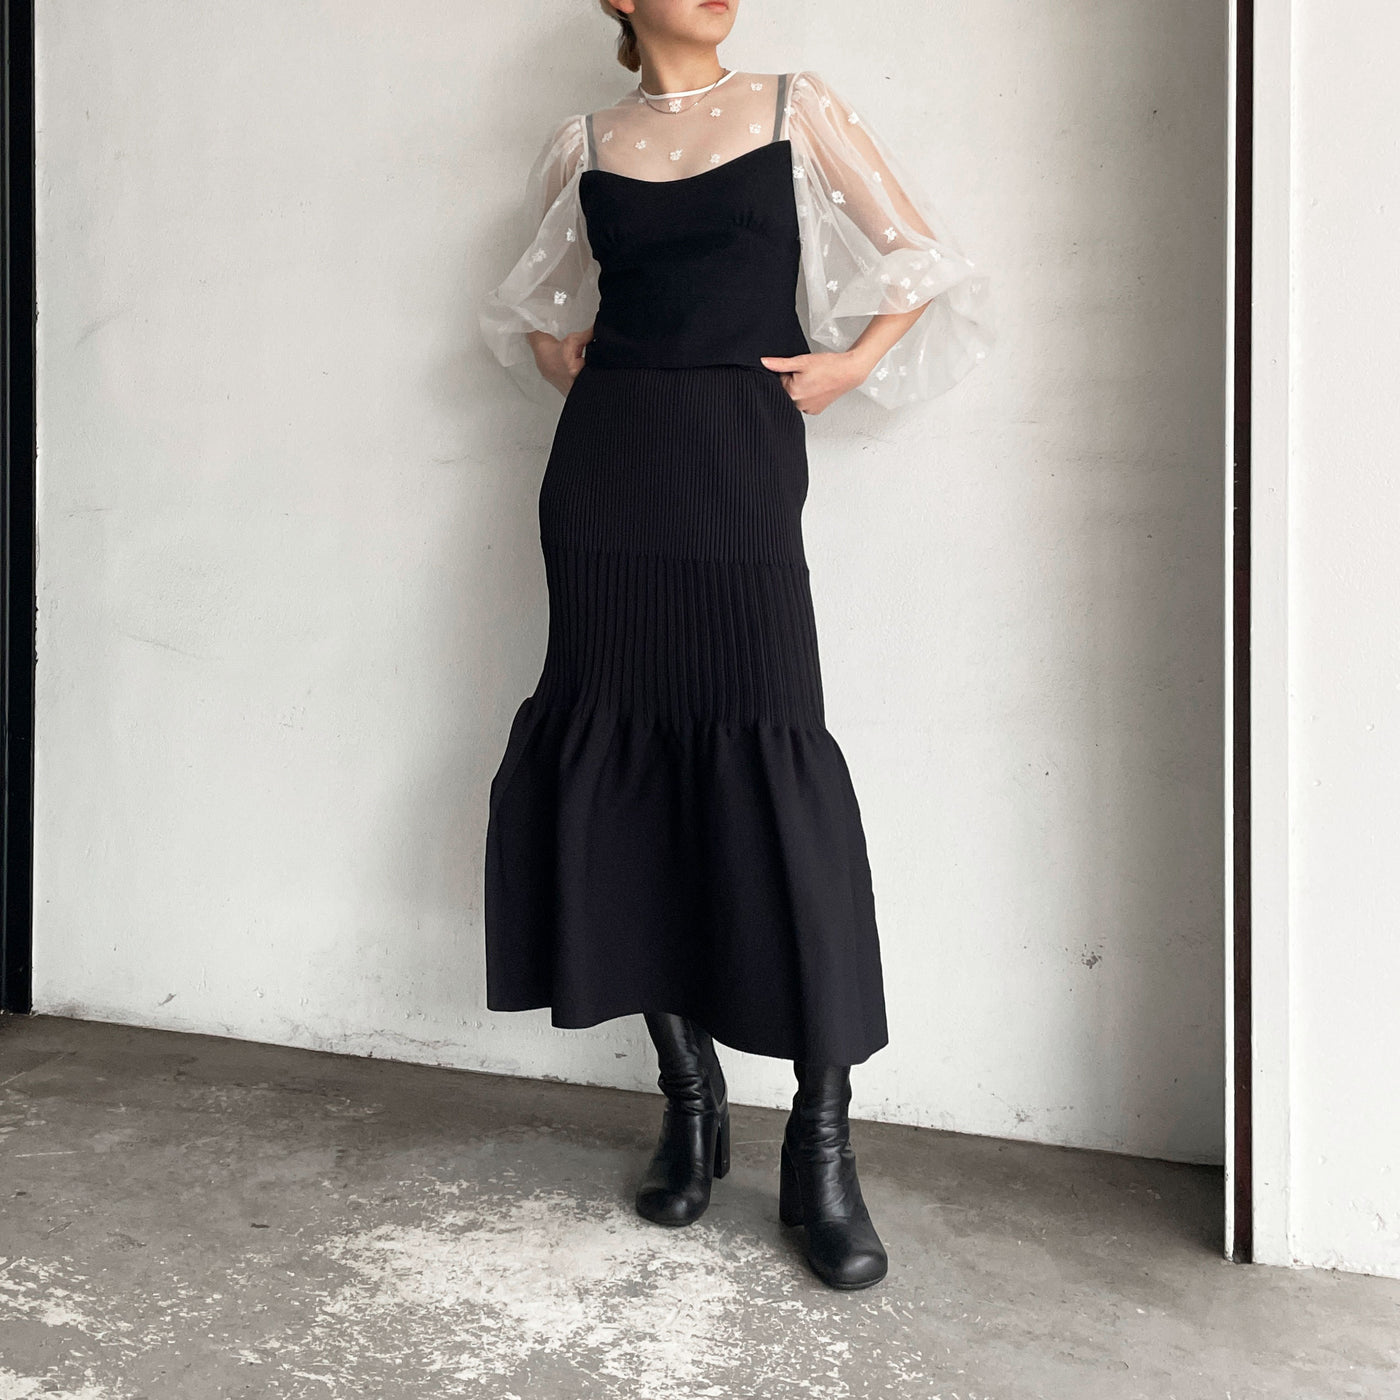 【GREED】 Small Flower embroidery Puff Short Top<br>【CFCL】 FLUTED SKIRT 2